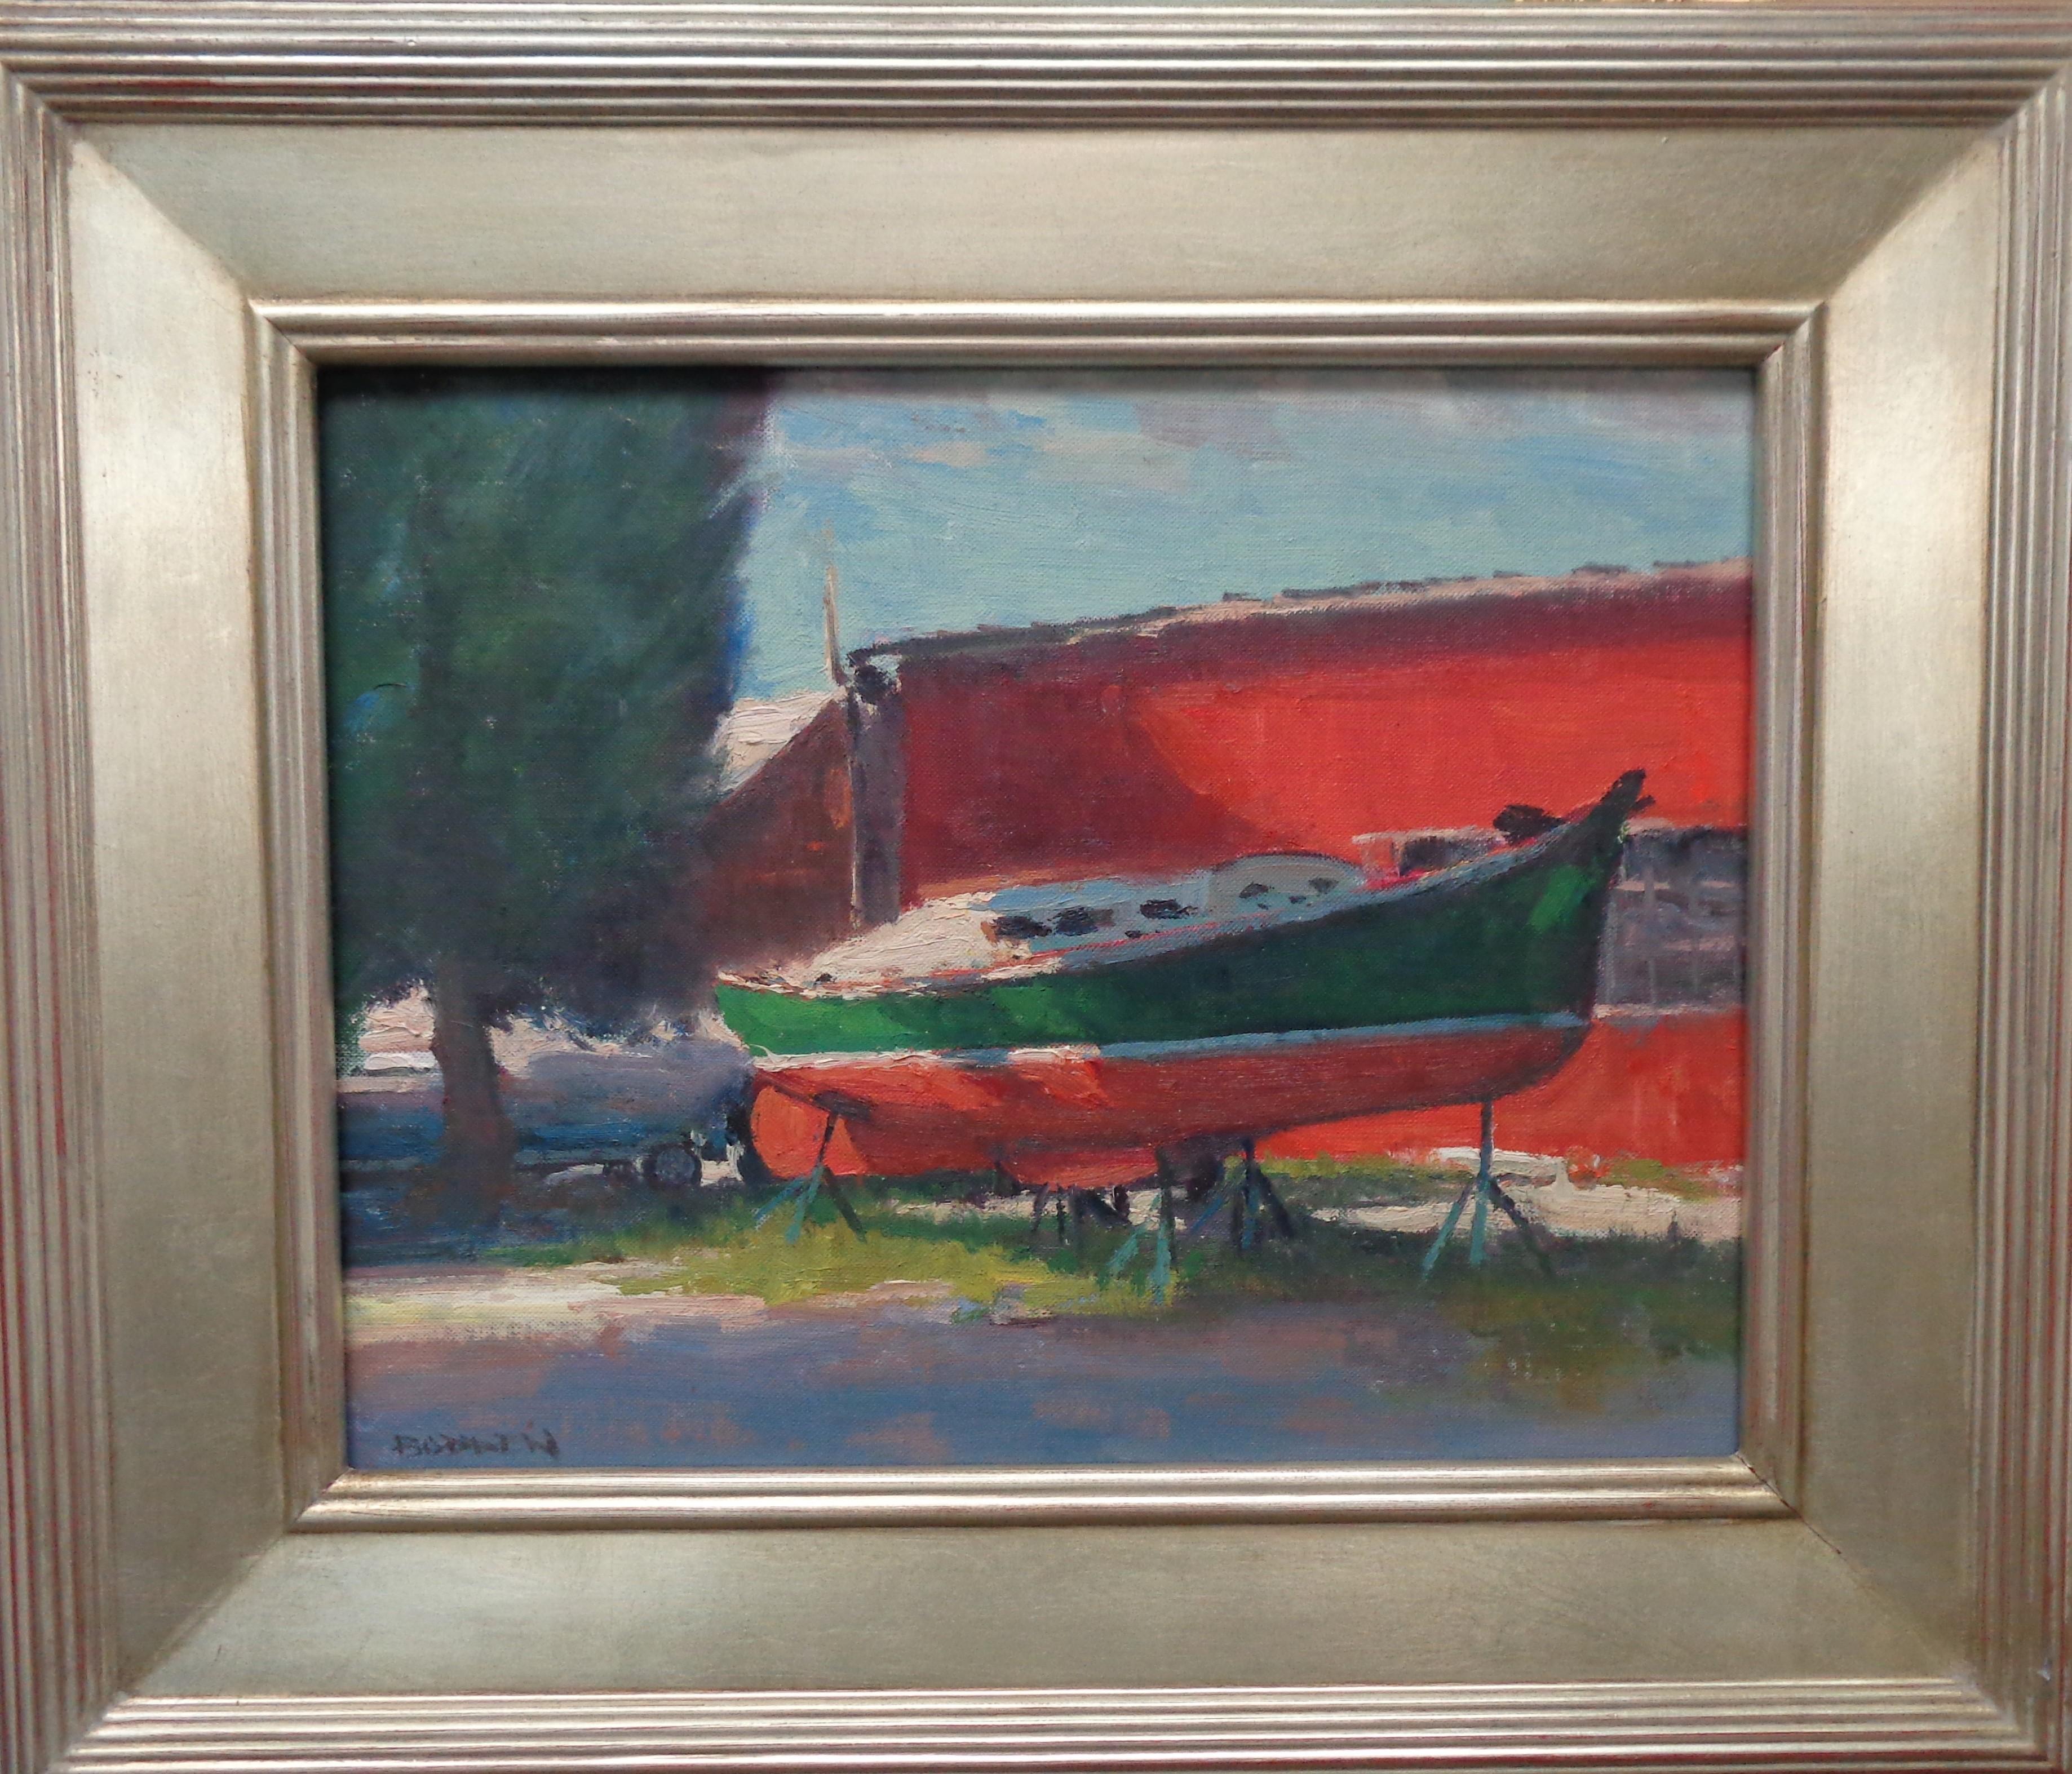 Fresh Paint
oil/panel 11 x 14 unframed 16.5 x 19.5 framed
Fresh Paint is an oil painting on canvas by award winning contemporary artist Michael Budden that showcases a beautiful boat with a fresh coat of paint from my painting travels to Oxford MD